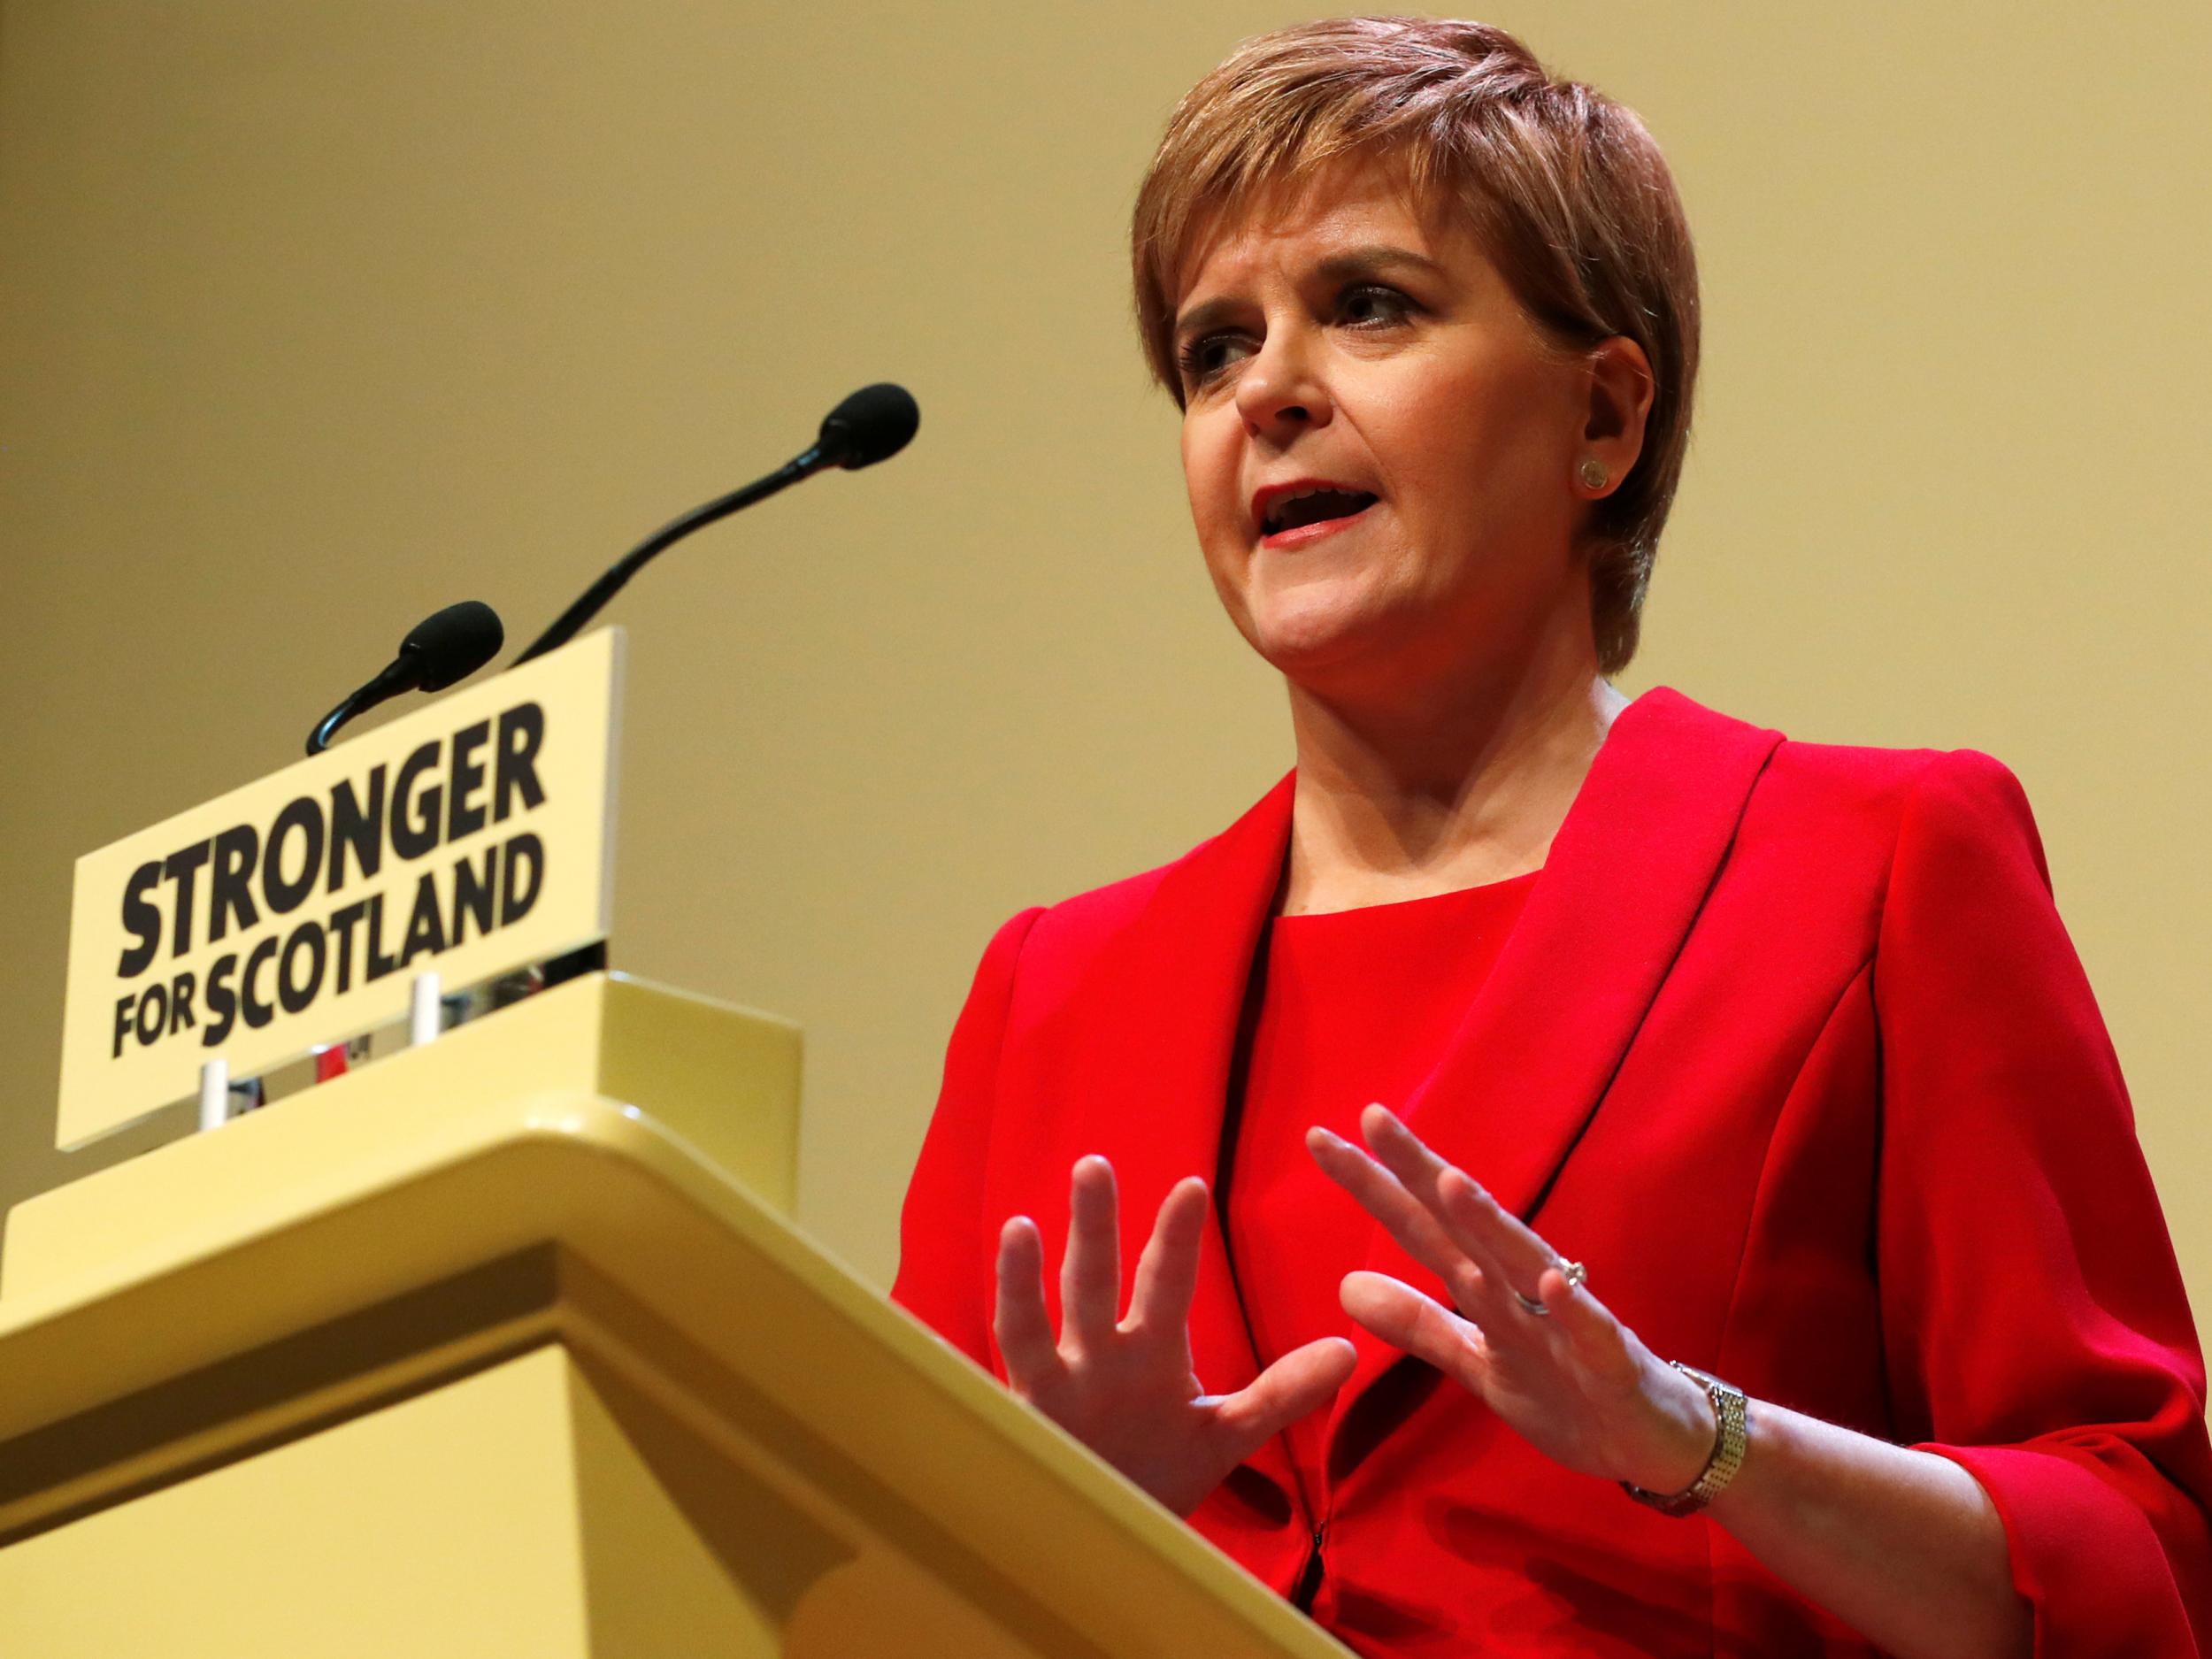 Nicola Sturgeon, Scotland's First Minister and leader of the Scottish National Party, delivers her party's election manifesto in Perth